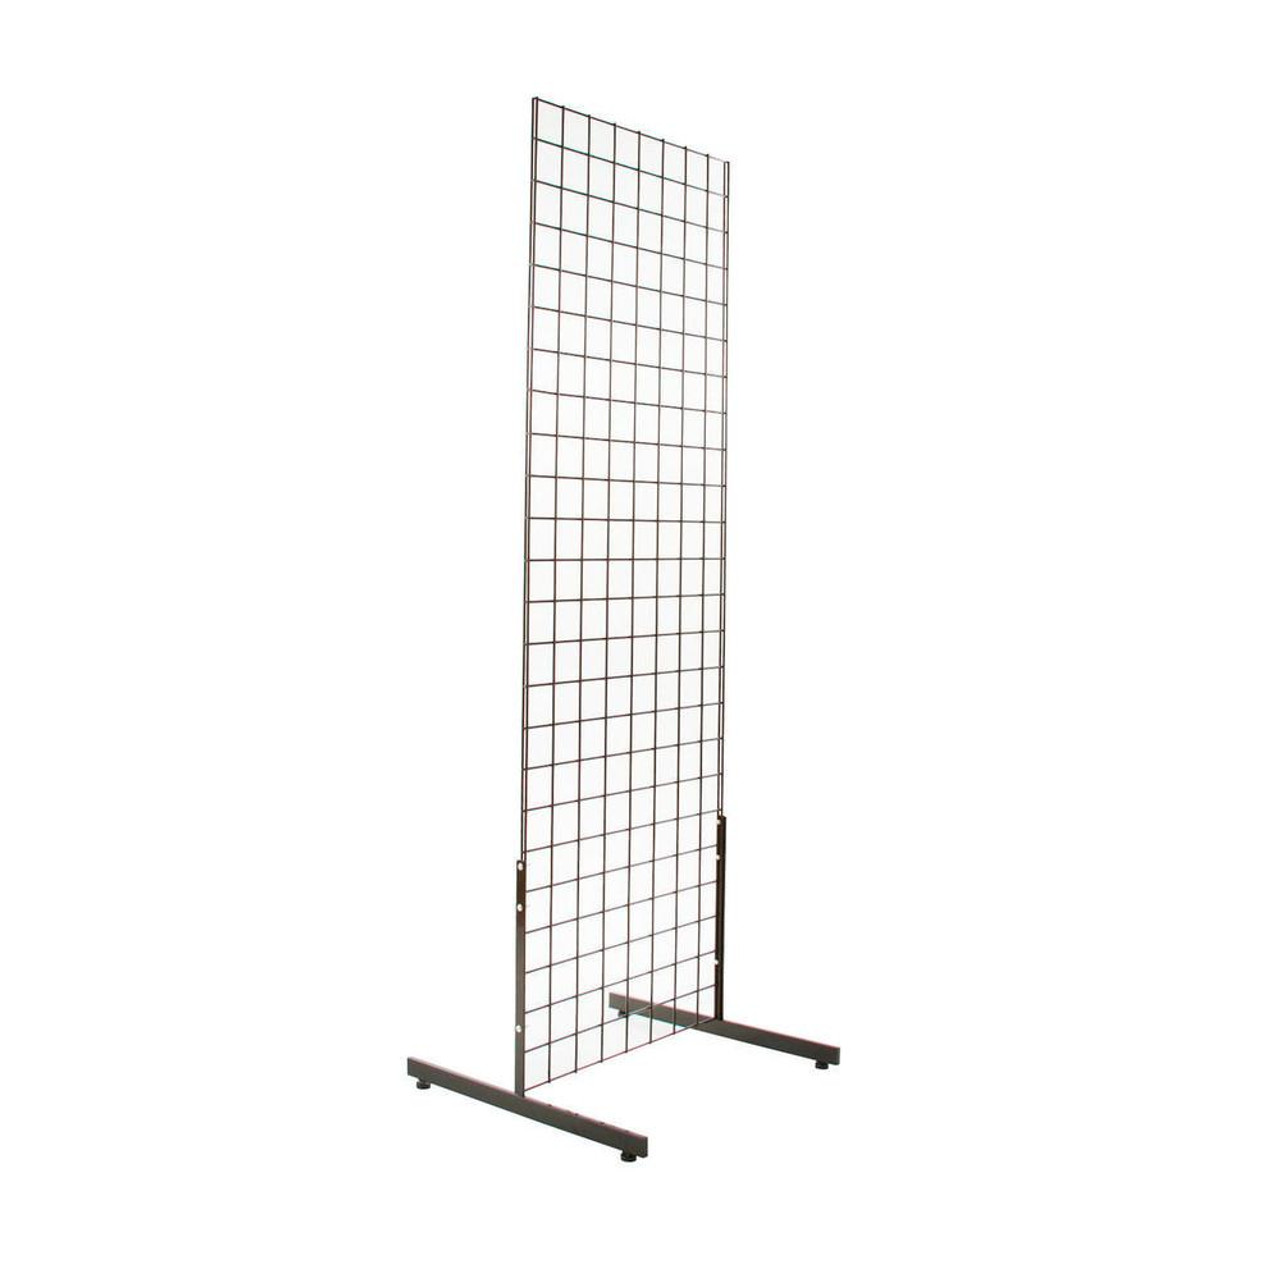 Displays 101 2' x 6' Gridwall Tower with T-Base 